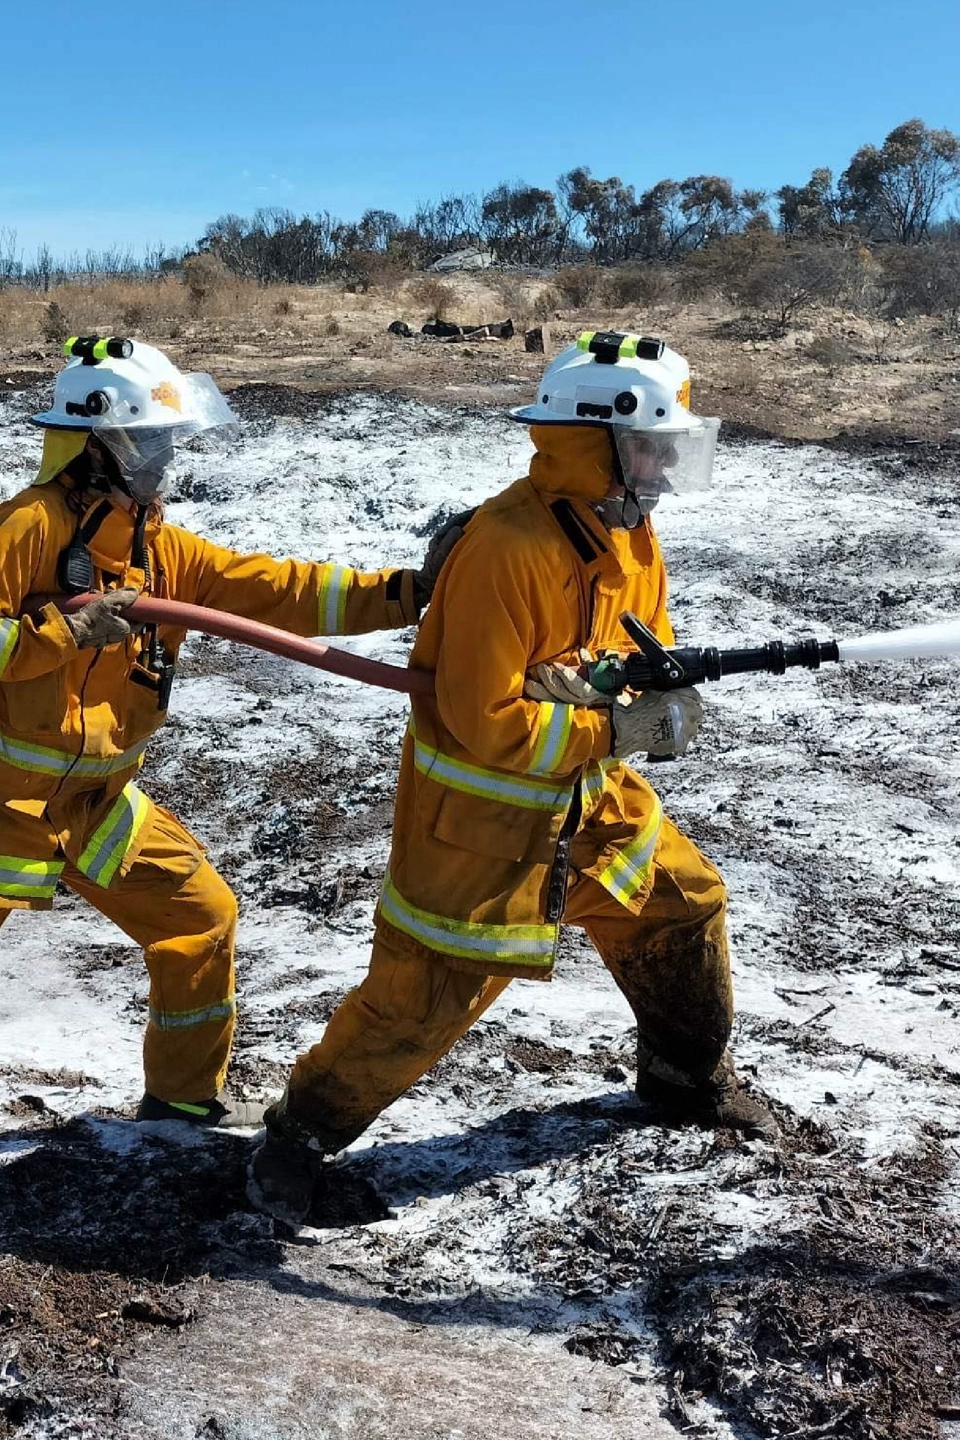 South Australian Country Fire Service (SACFS) - photography of firefigters in icey area